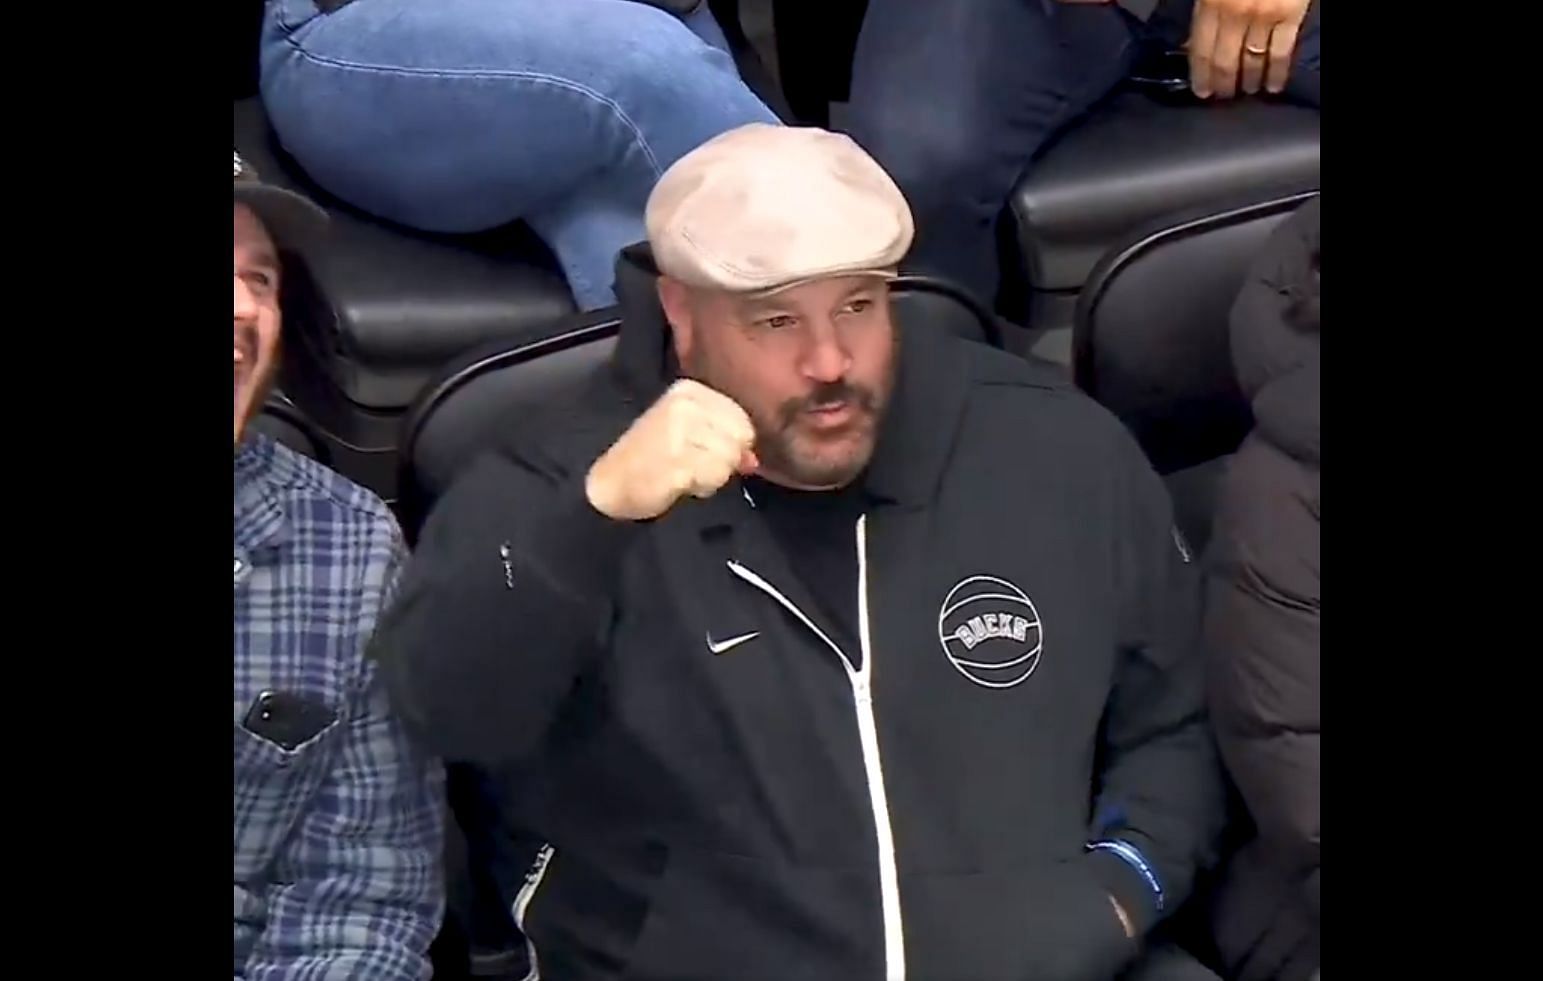 WATCH: Hollywood actor Kevin James at Vancouver Canucks game